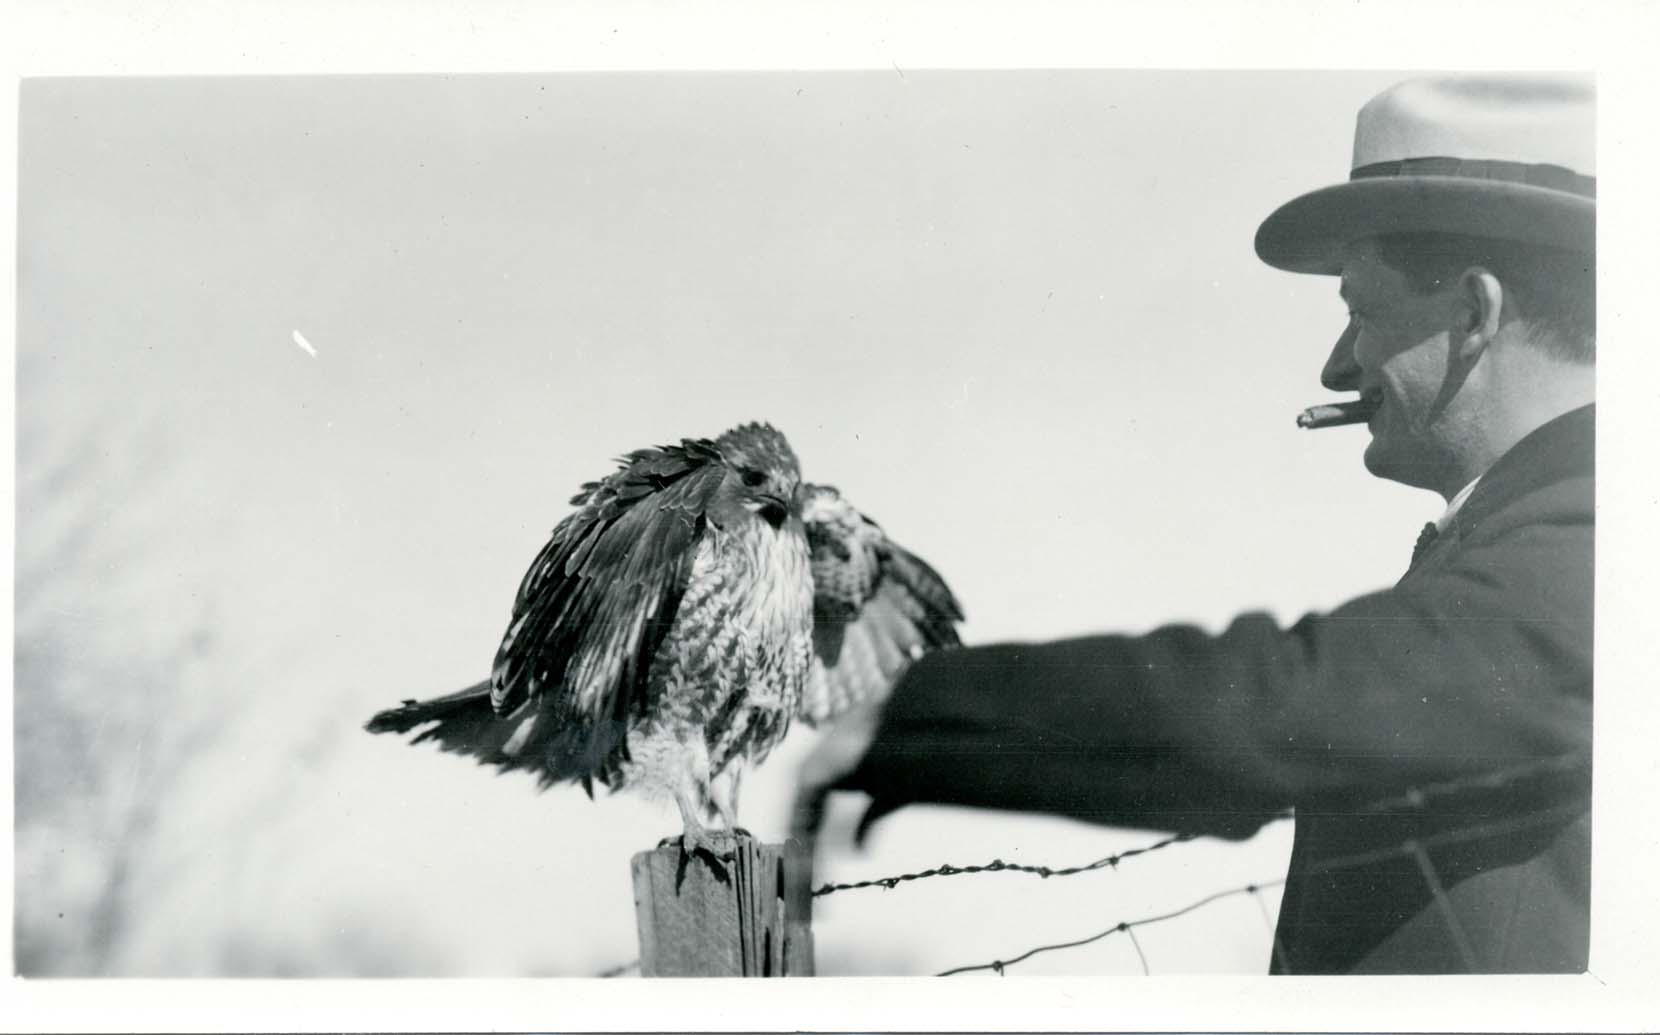 Photograph of an unidentified man standing next to a Red-tailed Hawk